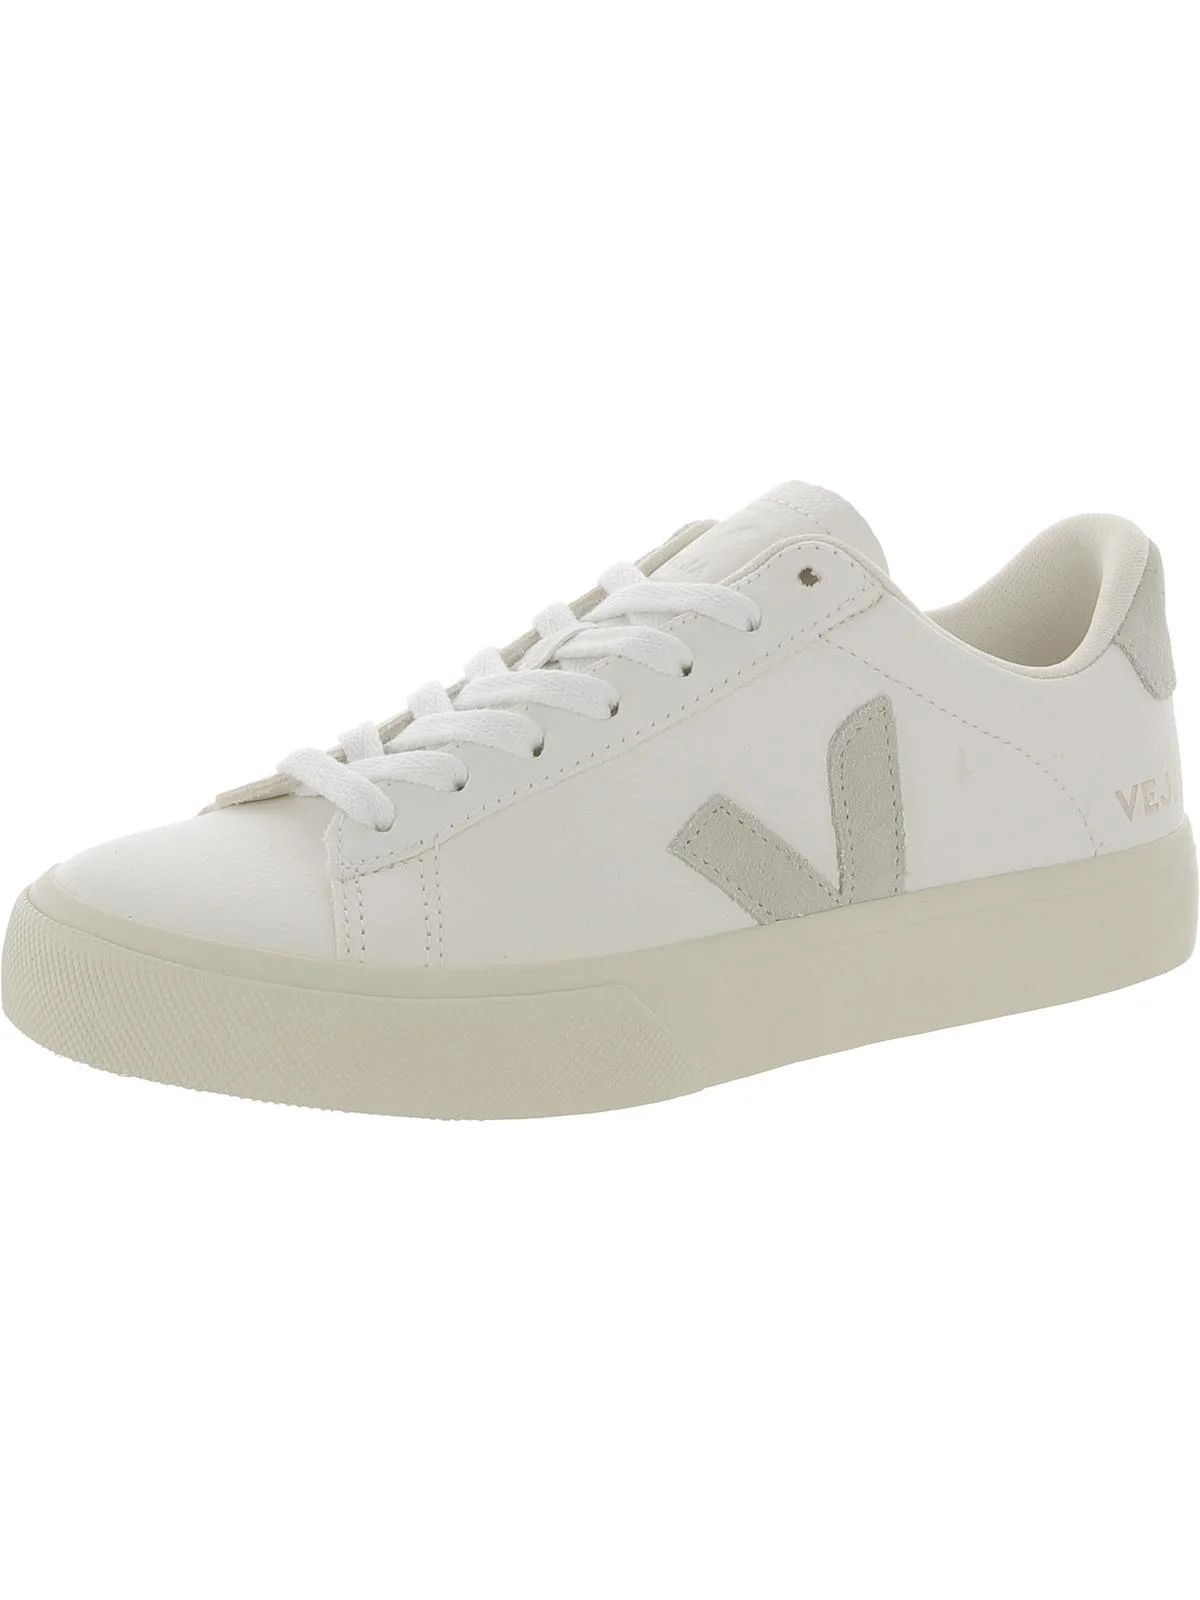 Veja Womens Leather Mid-Sole Casual and Fashion Sneakers | Walmart (US)